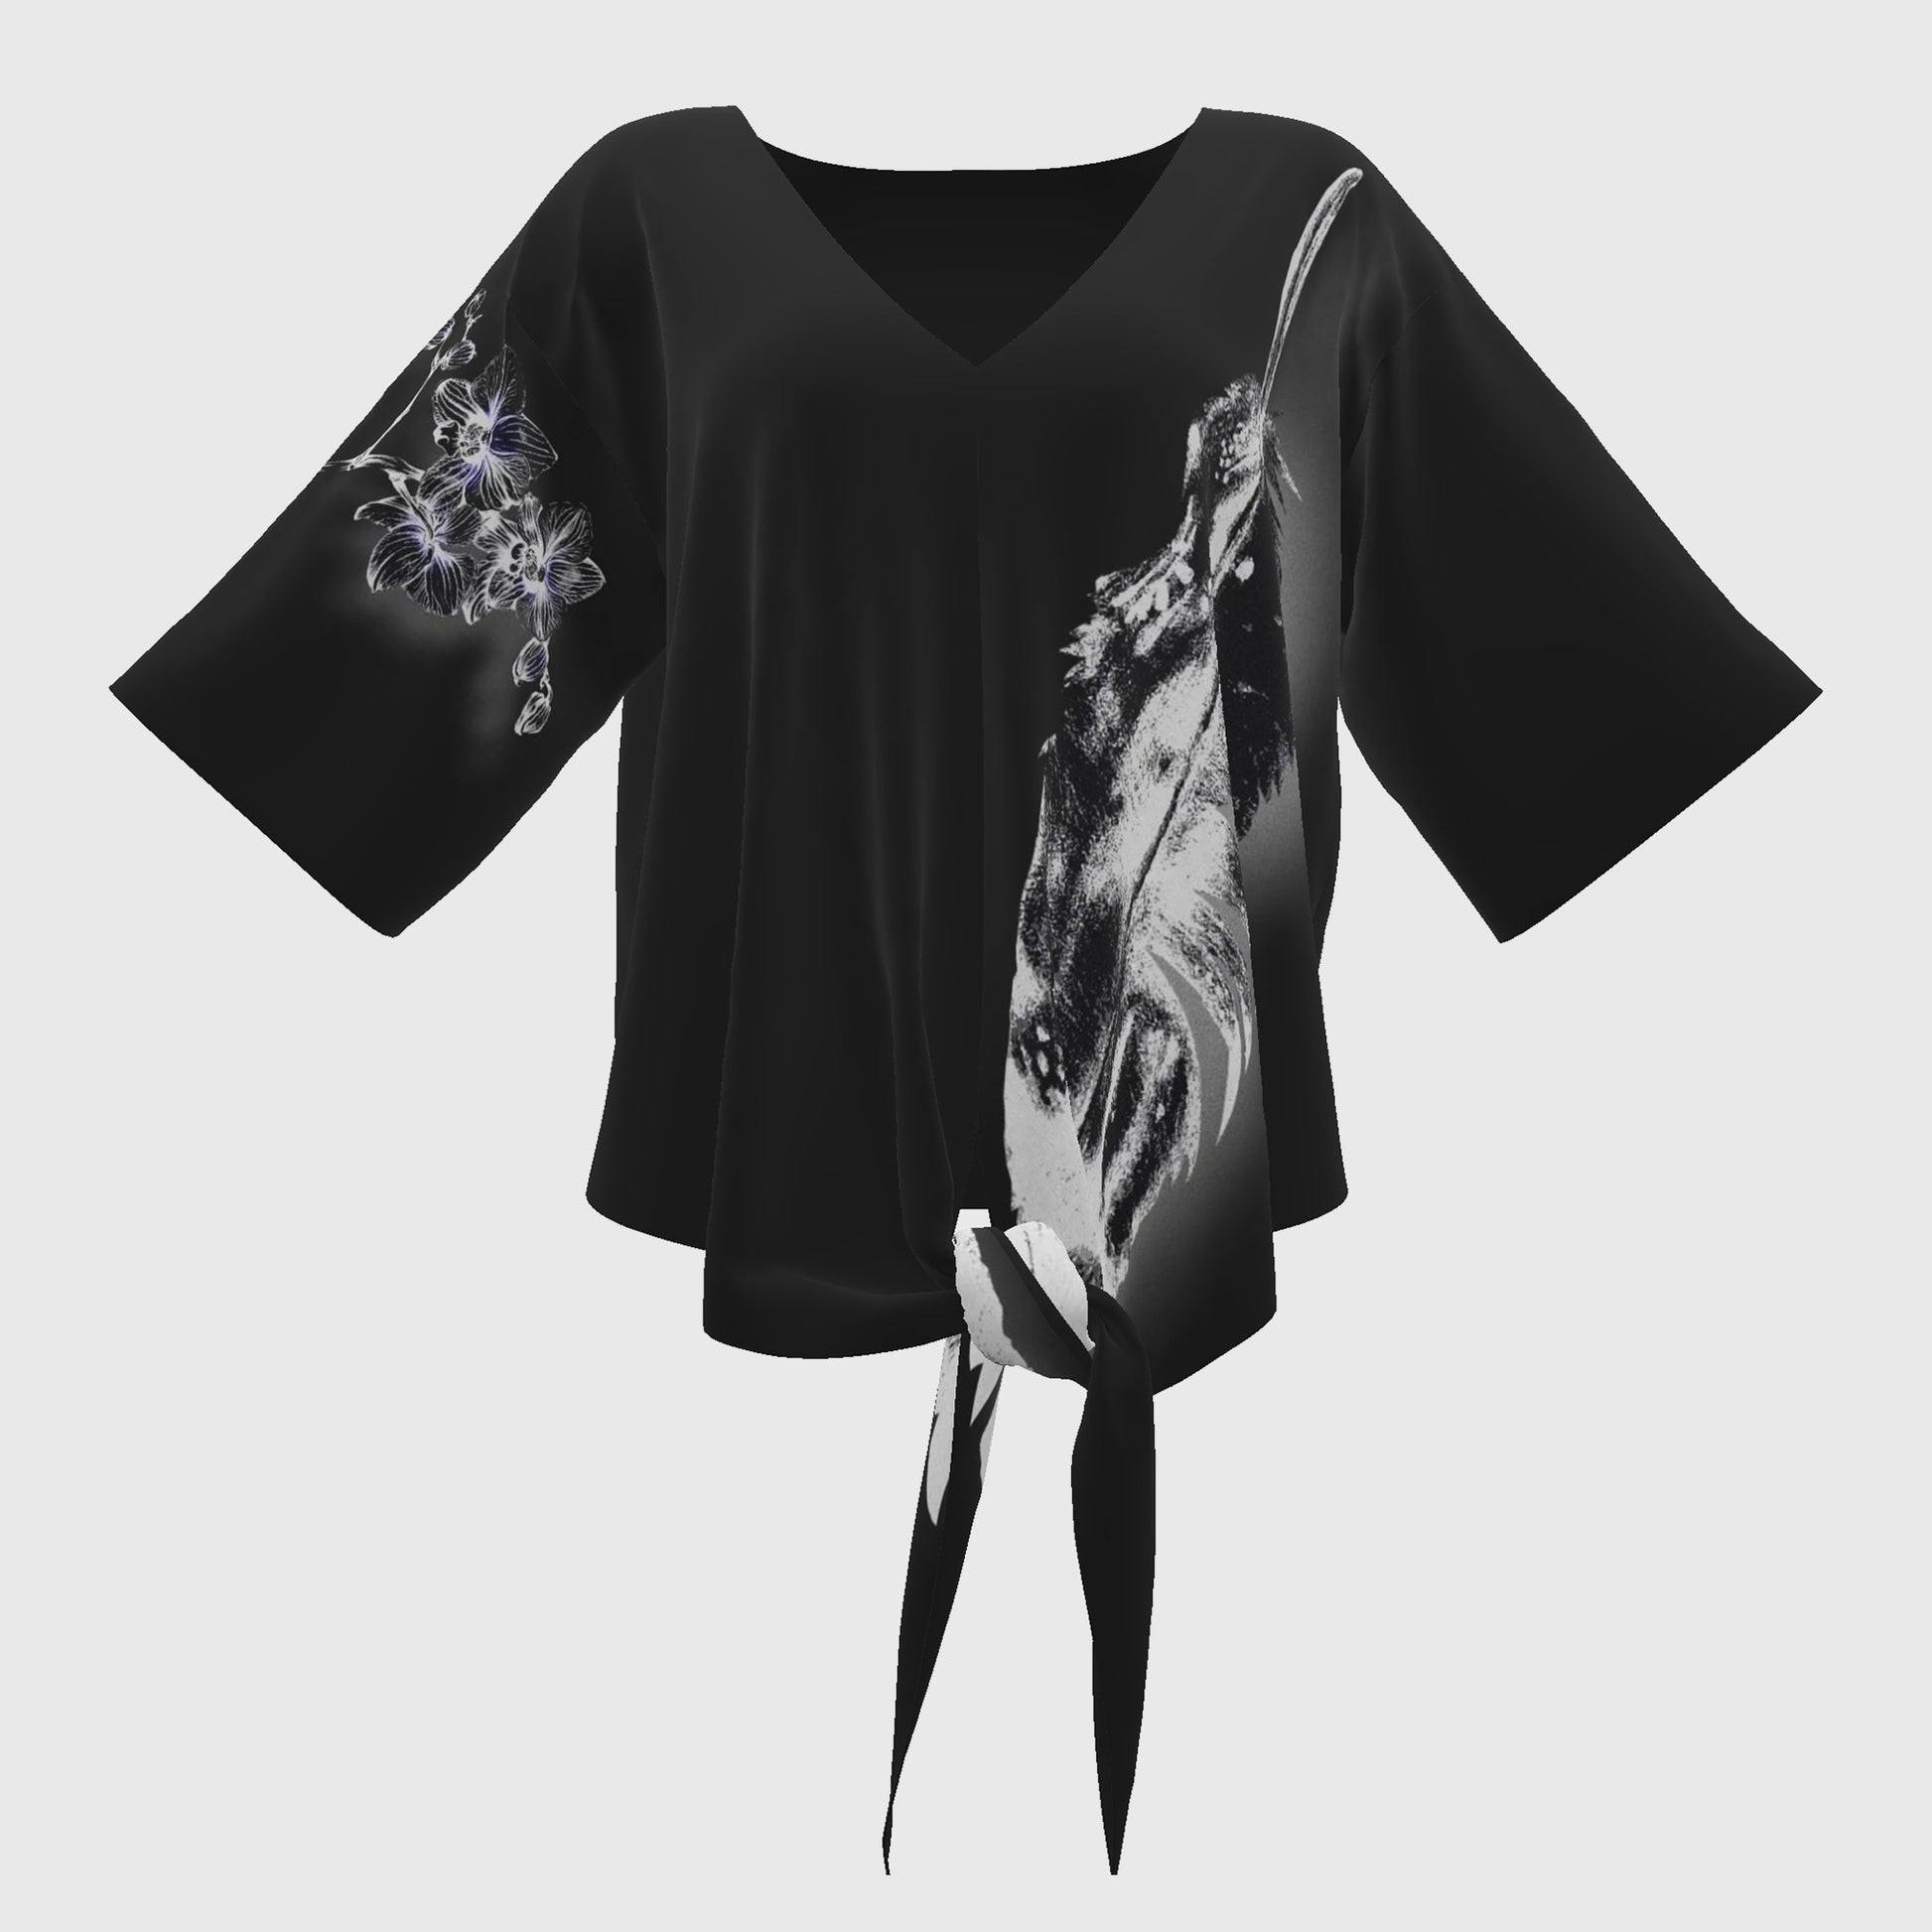 inverted*grey*deep*grey*indigenous*native*american*eagle*feather*orchid*knot*blouse*women's